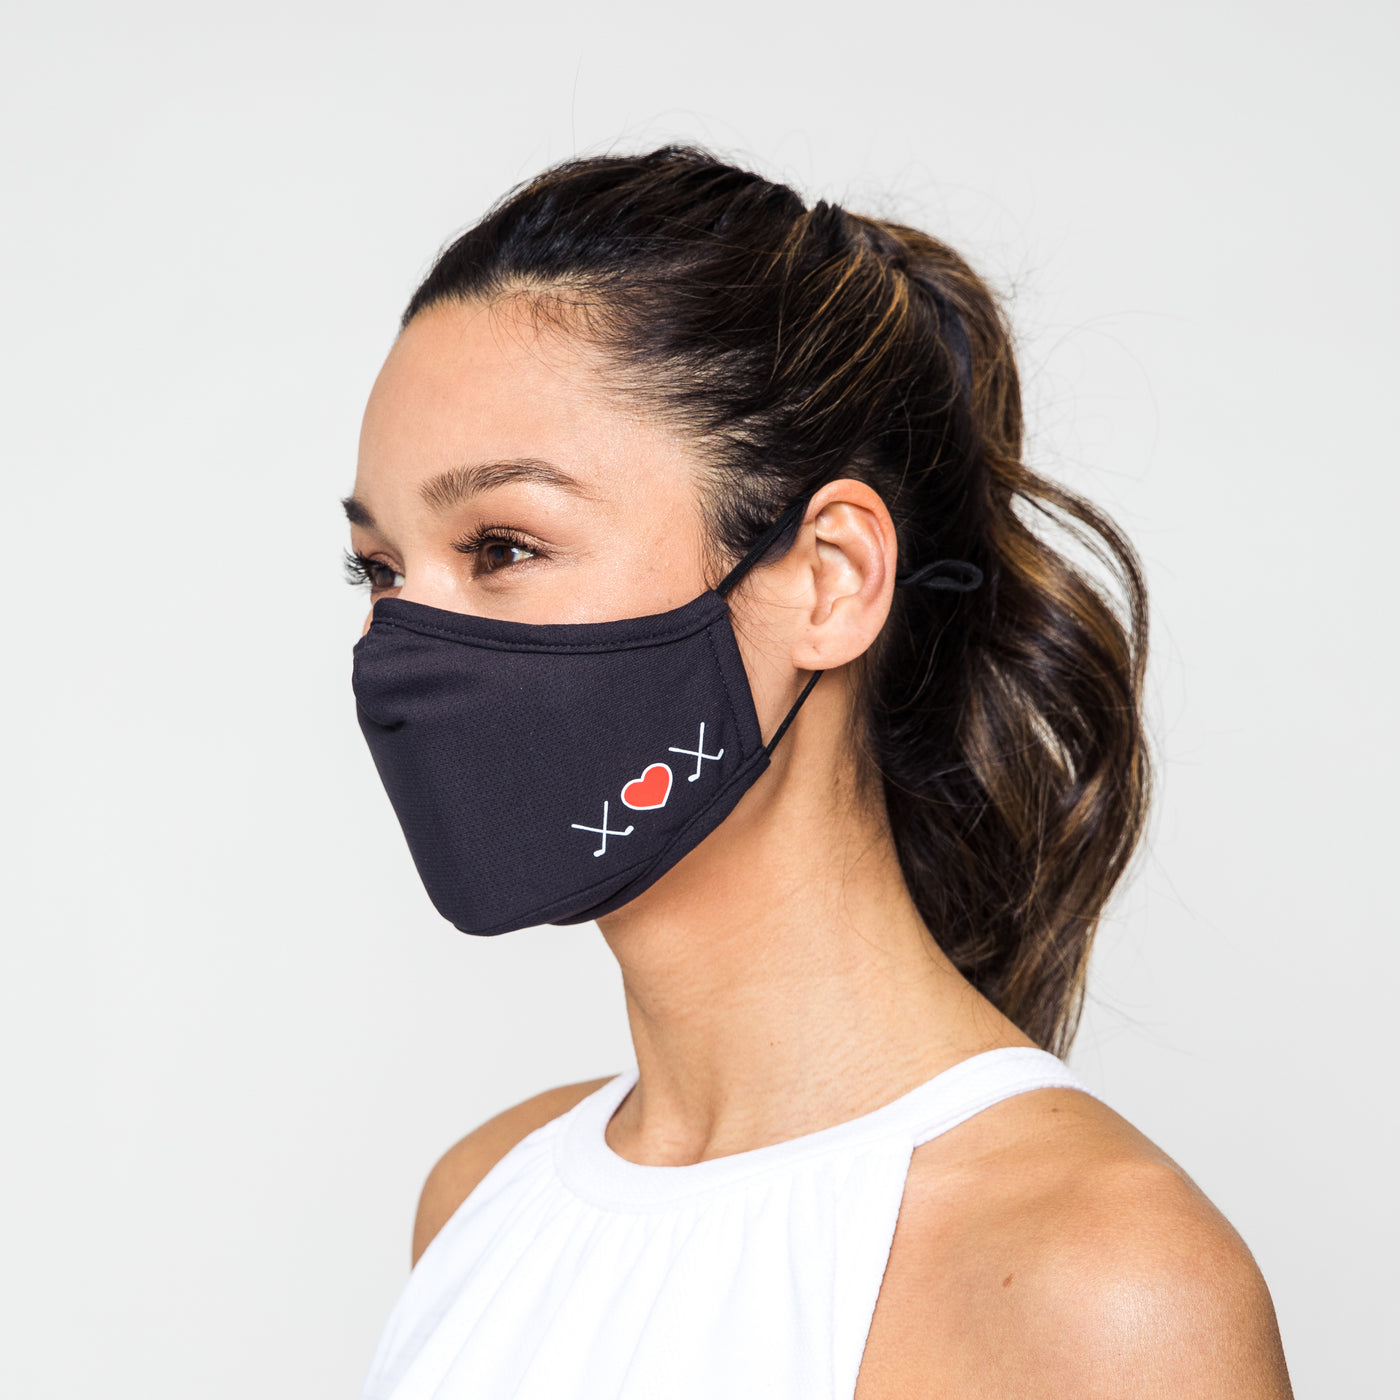 woman wearing charcoal grey face mask with white crossed golf clubs and red heart printed on one side